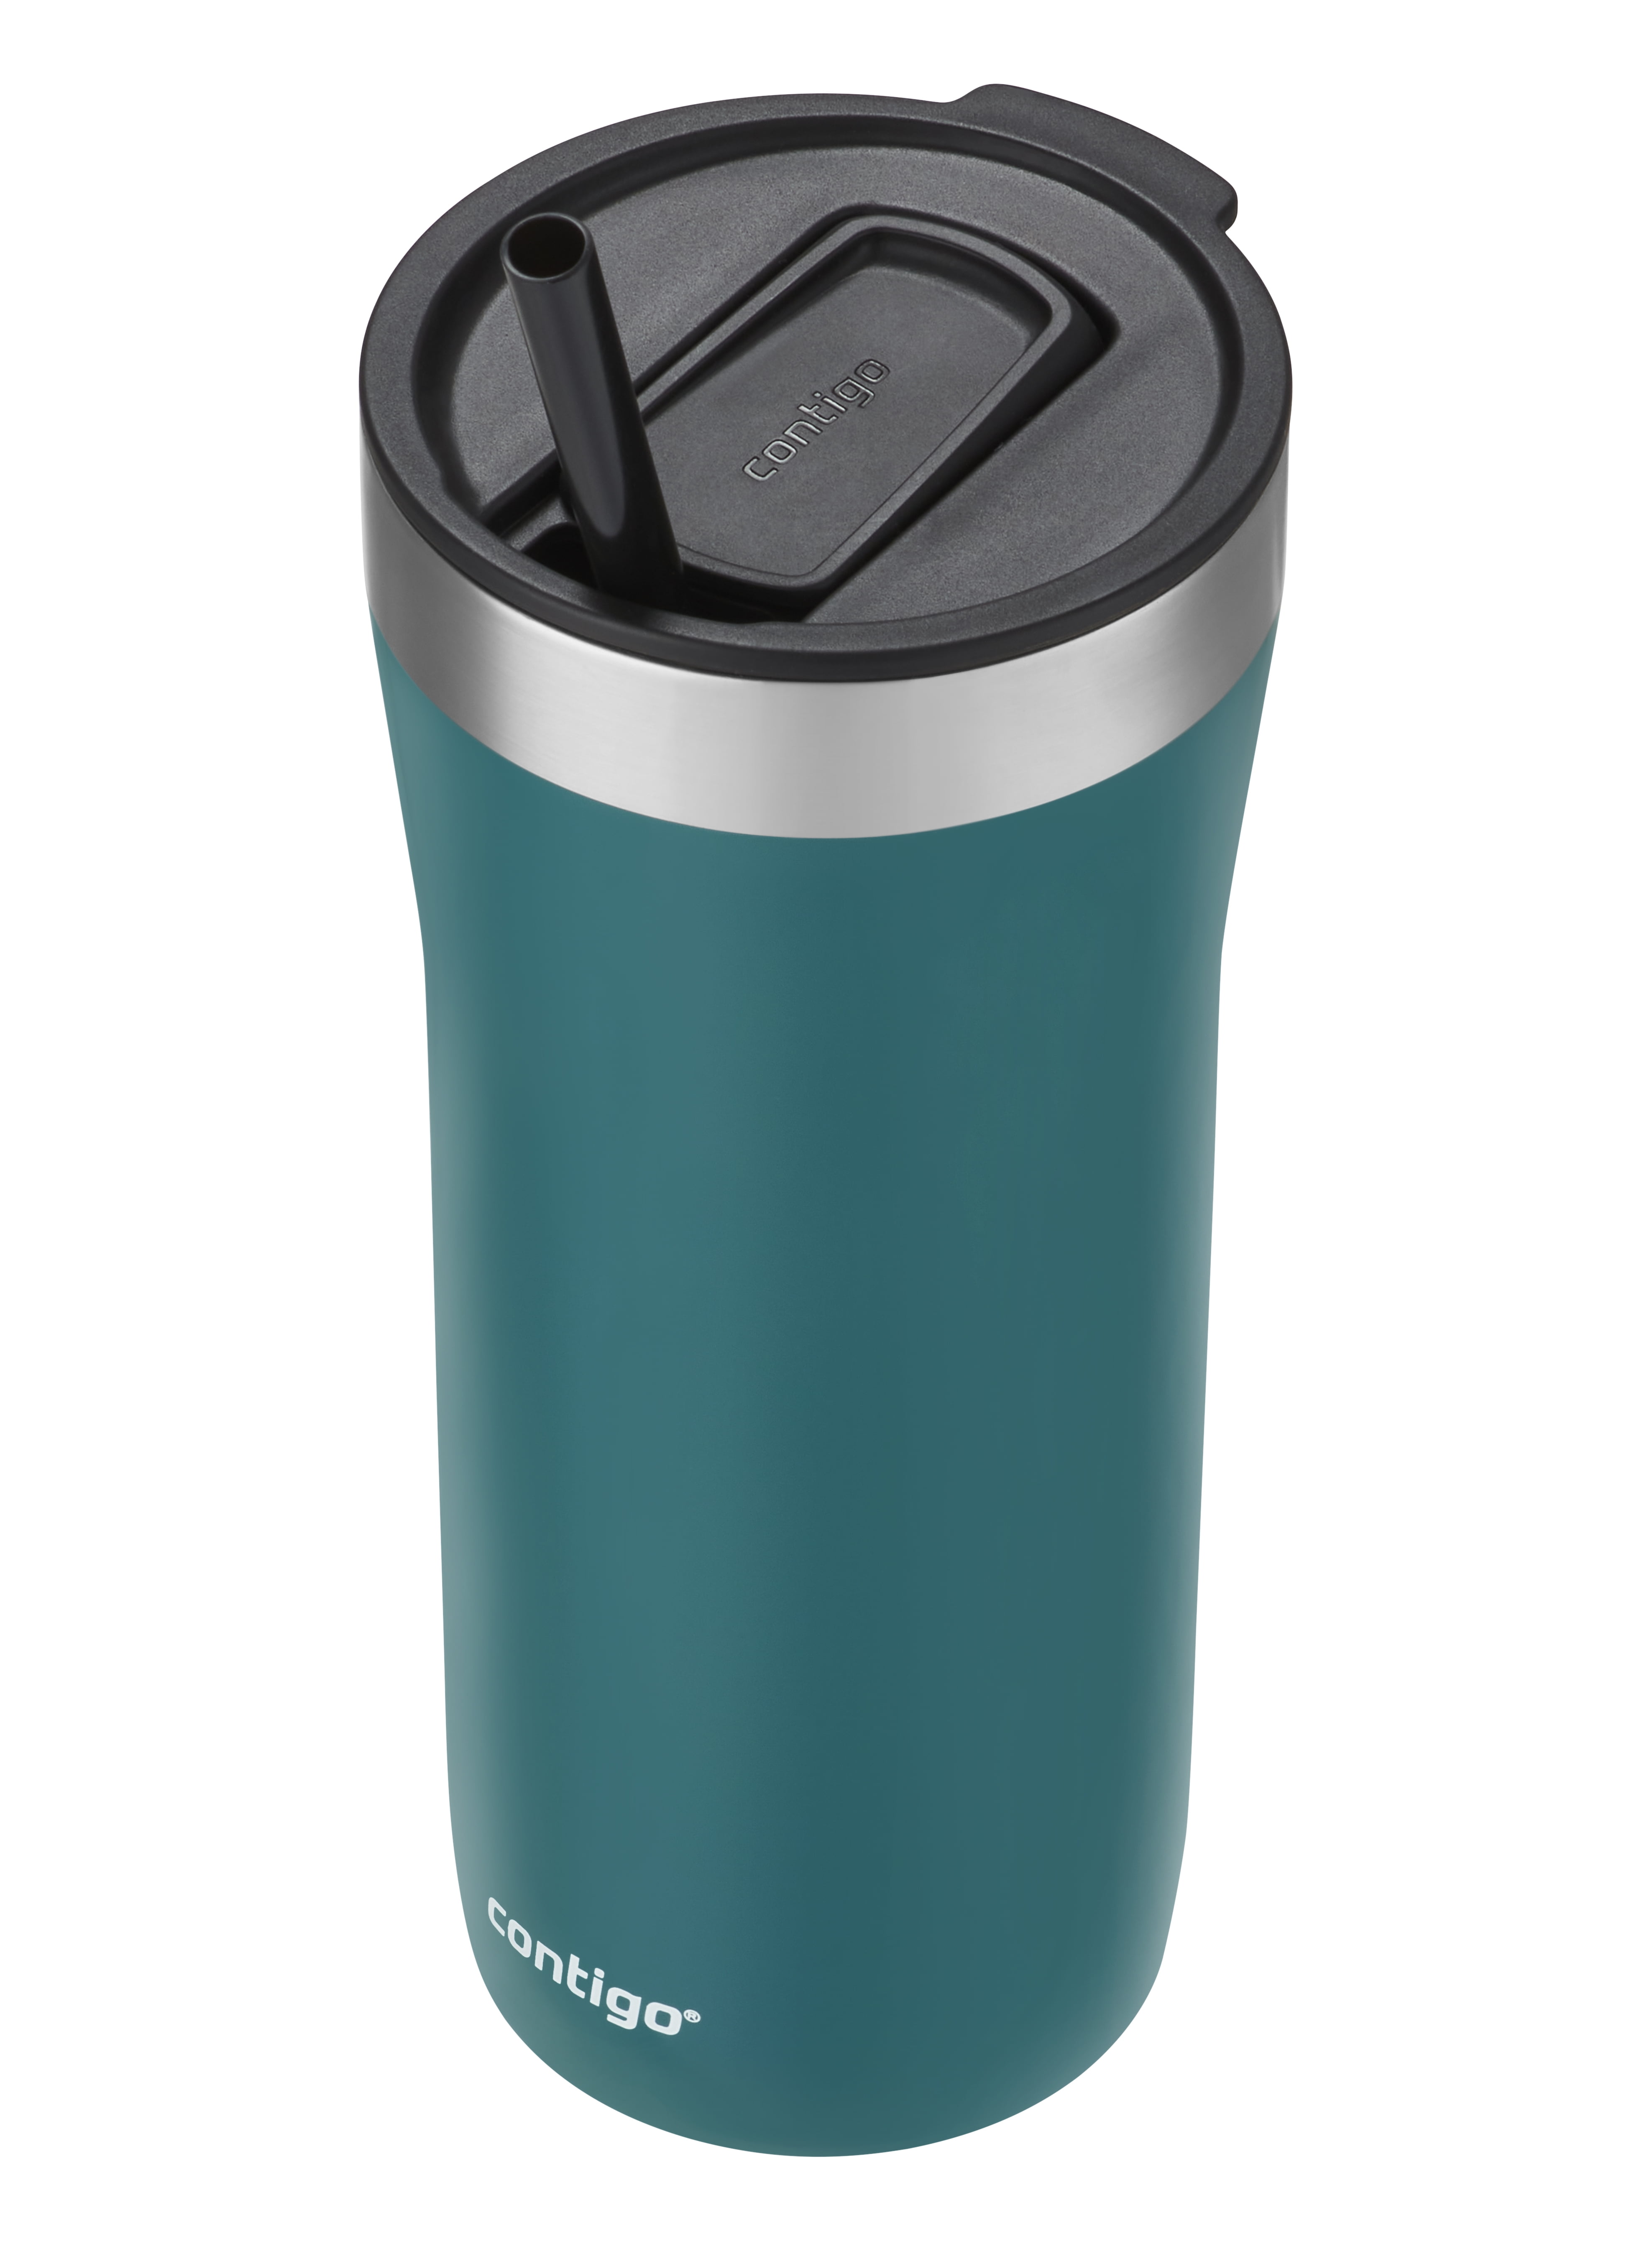 Contigo 2167645 Streeterville Stainless Steel Tumbler with Plastic Straw in Blue 32 fl oz.